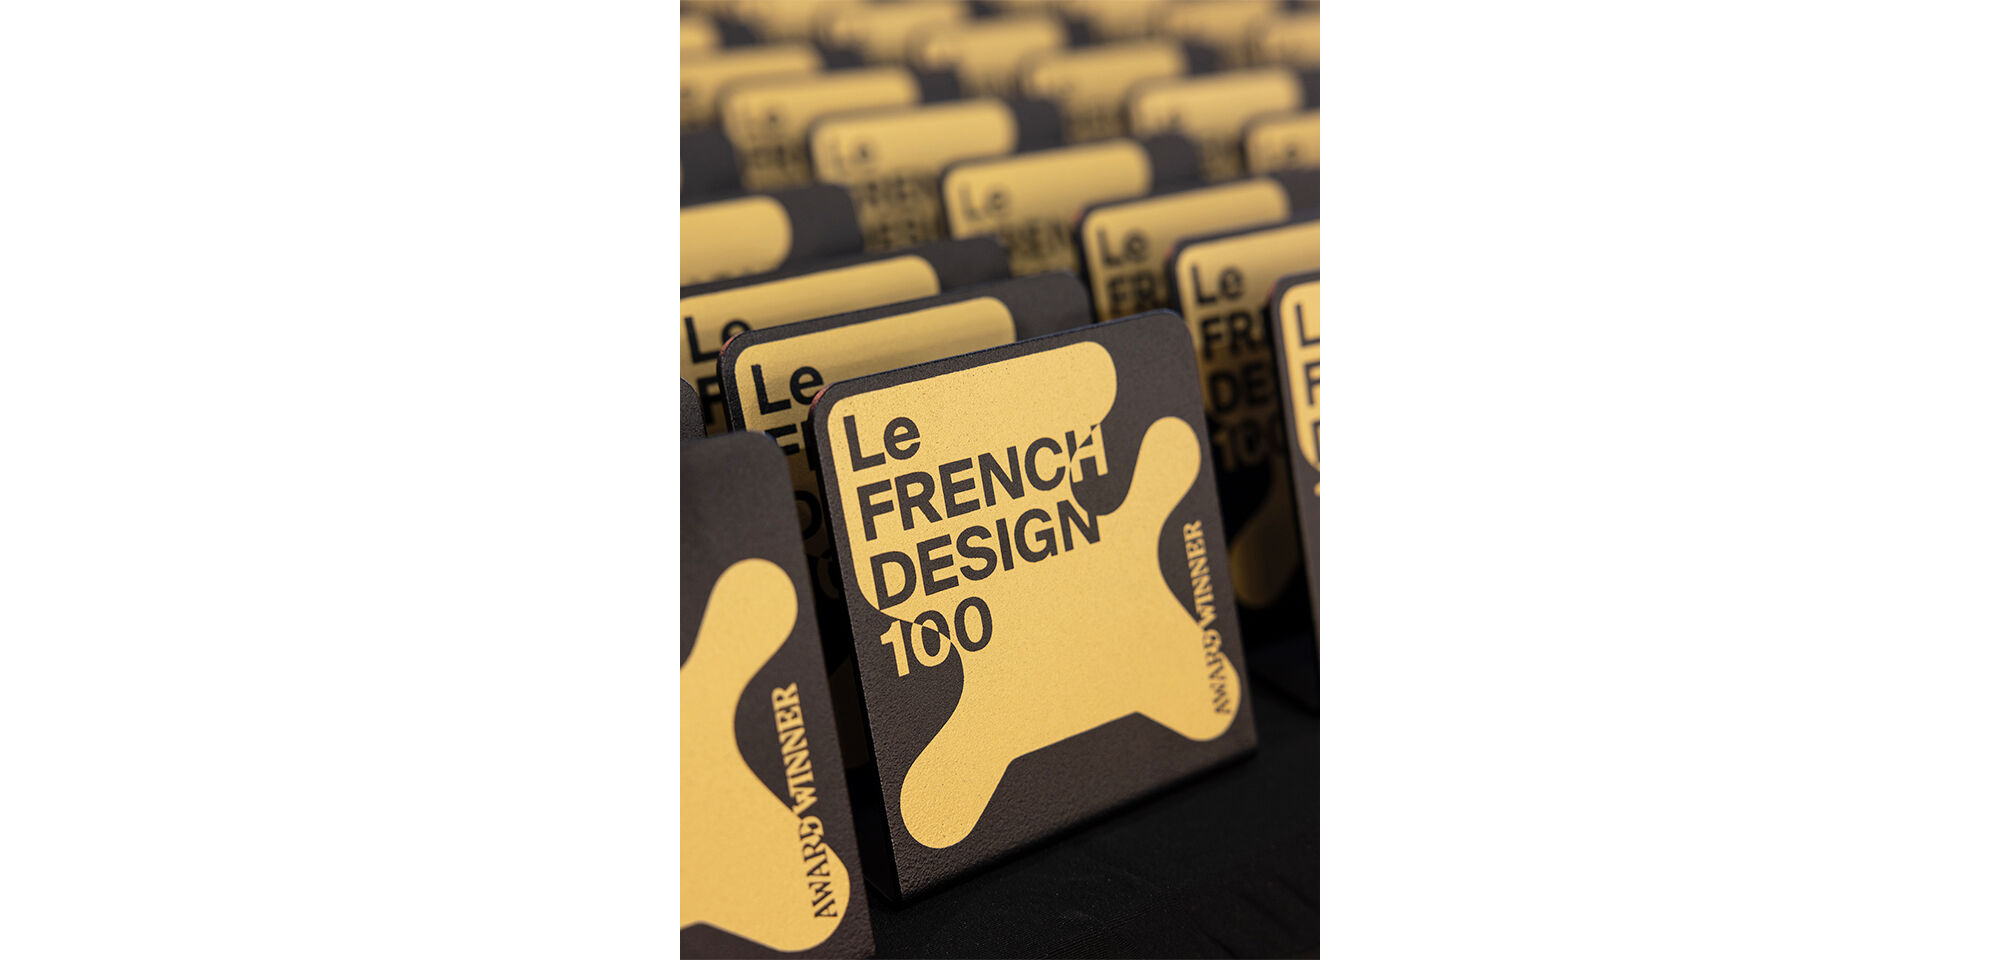 The French Design 100 award